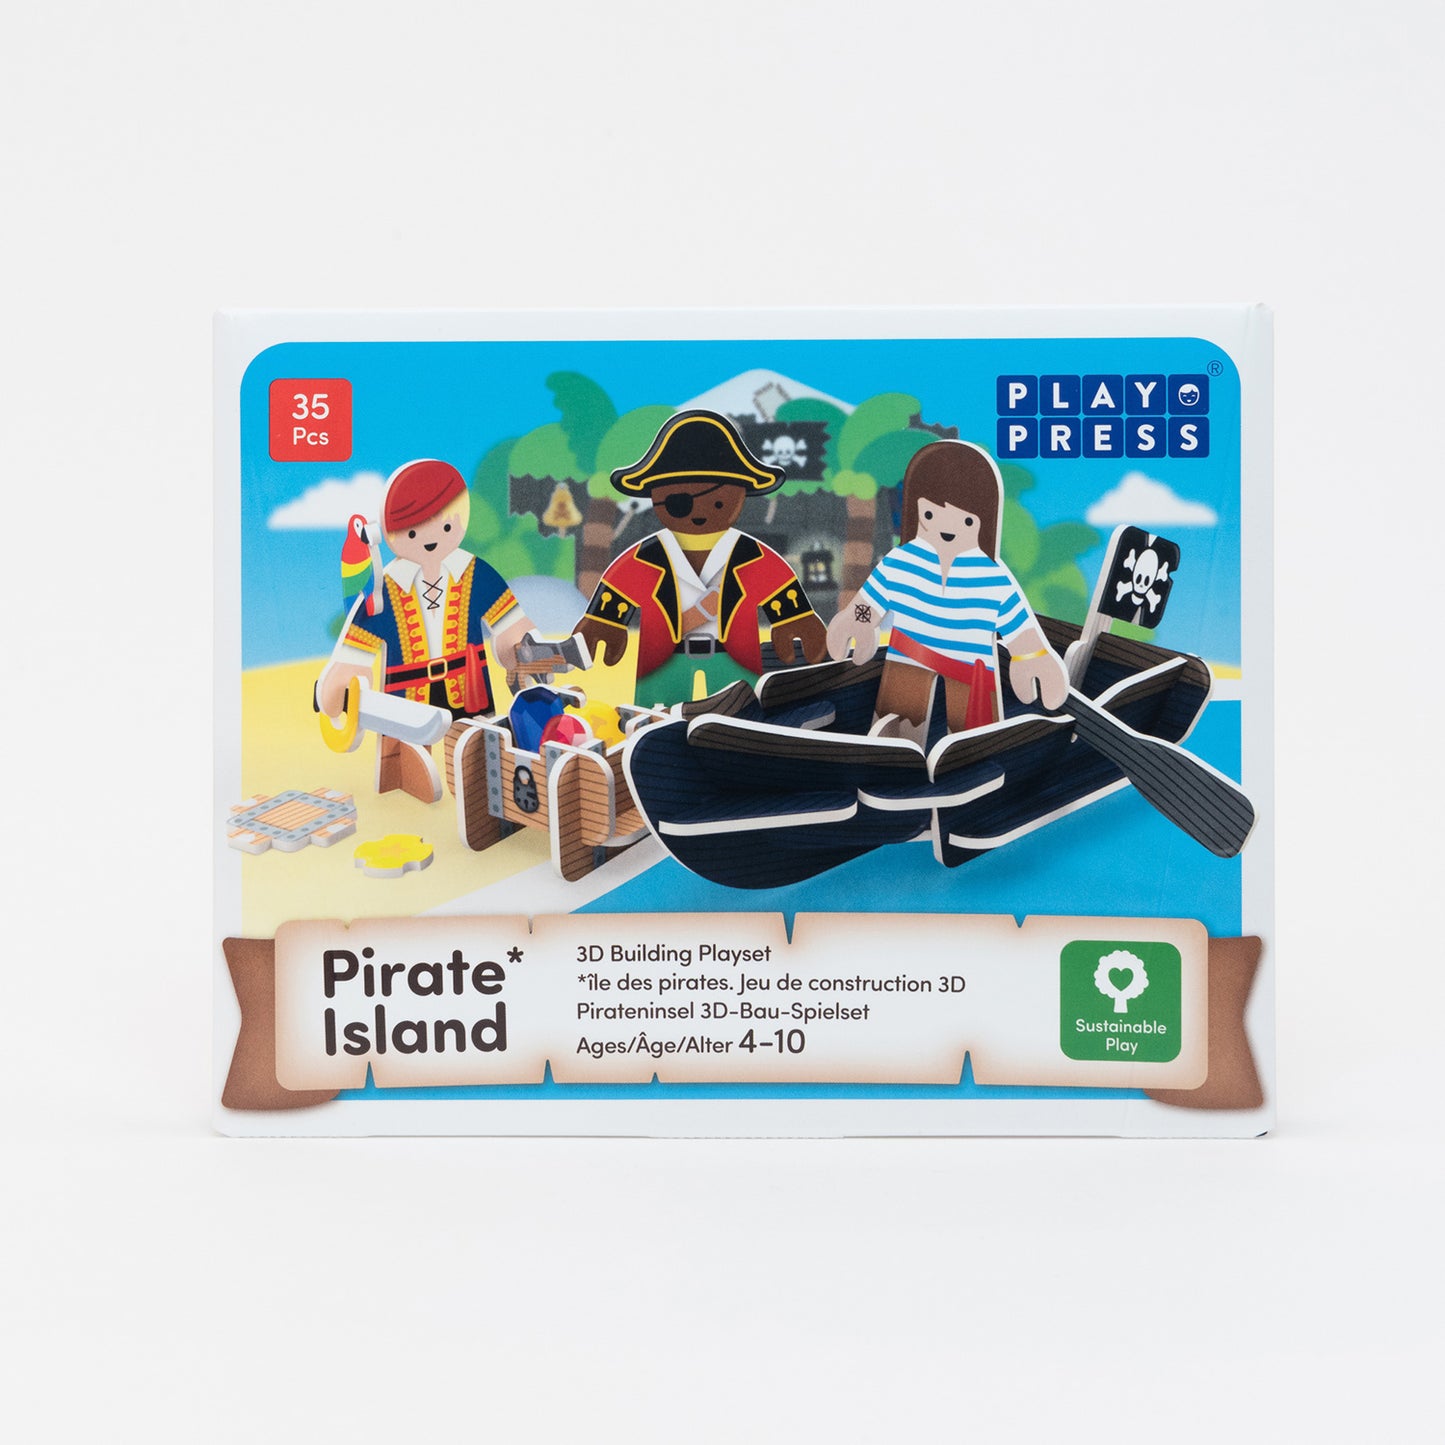 Pirate Island Playset. 3D building Playset, Ages 4-10, Sustainable play. Play & Press 35 pieces. 3 playboard pirate models, their buildable rowboat including treasure chests & a trusty parrot. 